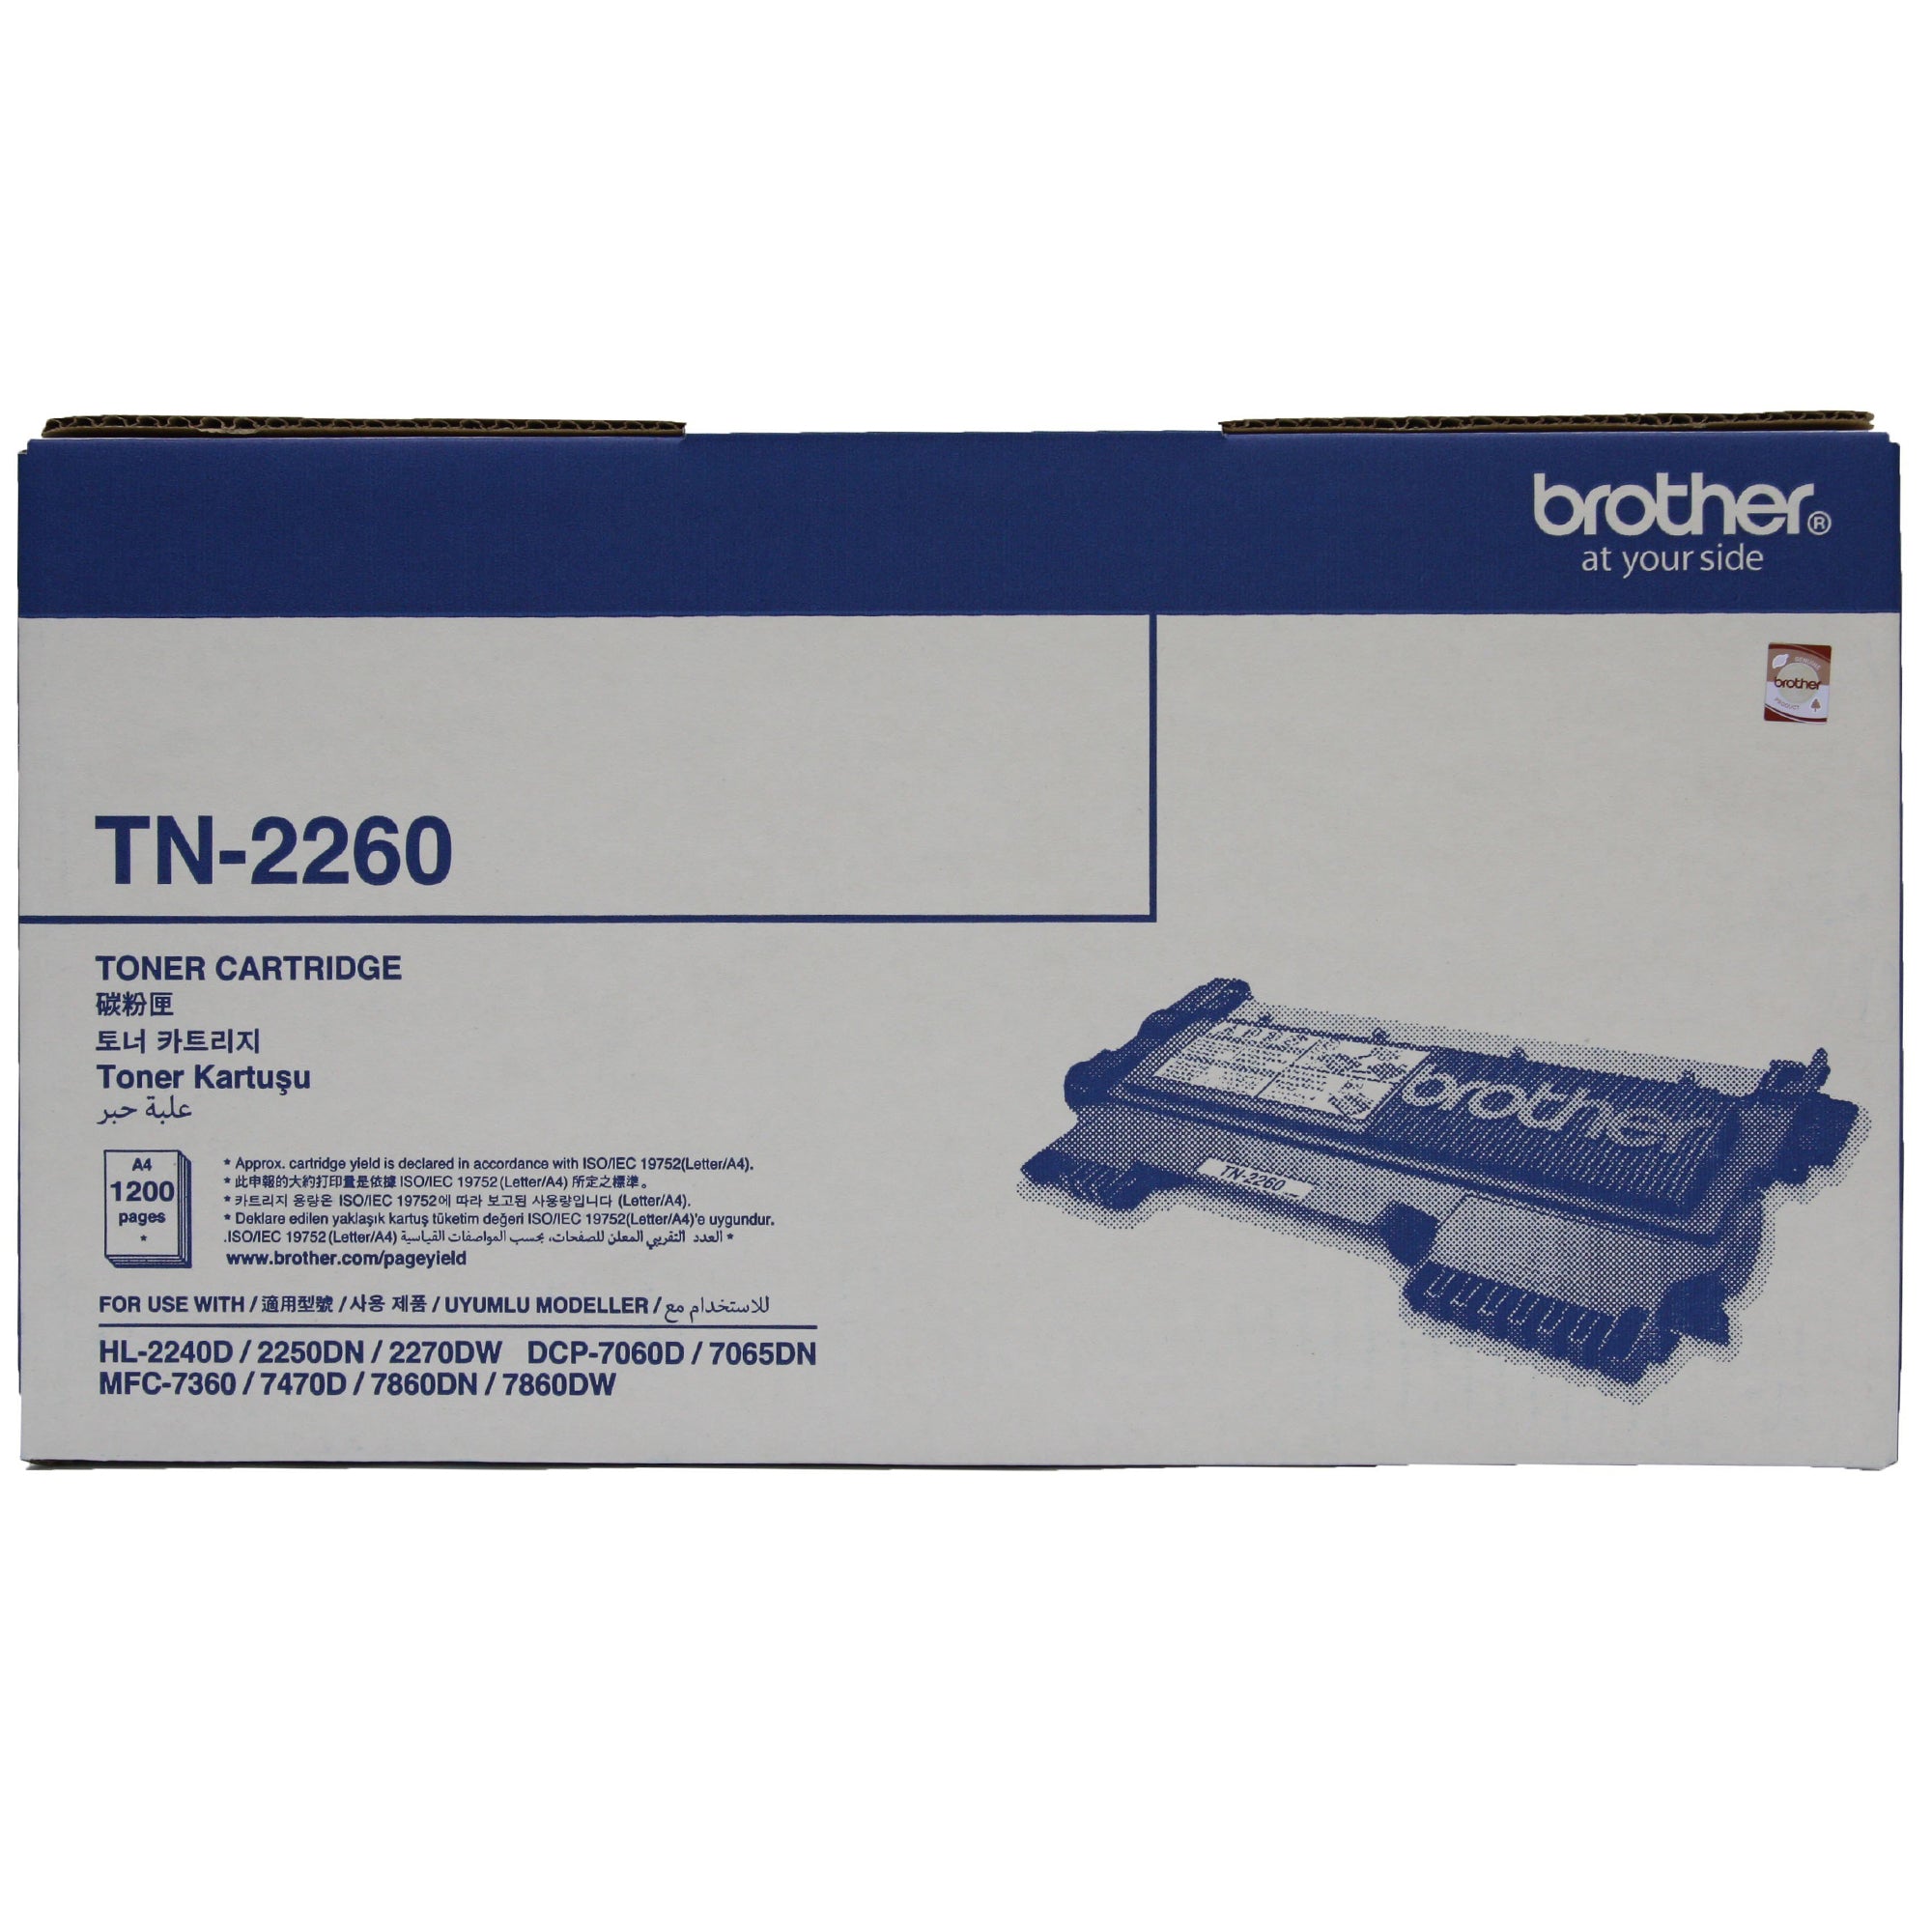 Brother TN-2260 Toner Cartridge for HL-2250 2240D DCP-7060D, 7065DN, MFC-7360 7860DW and FAX-2840